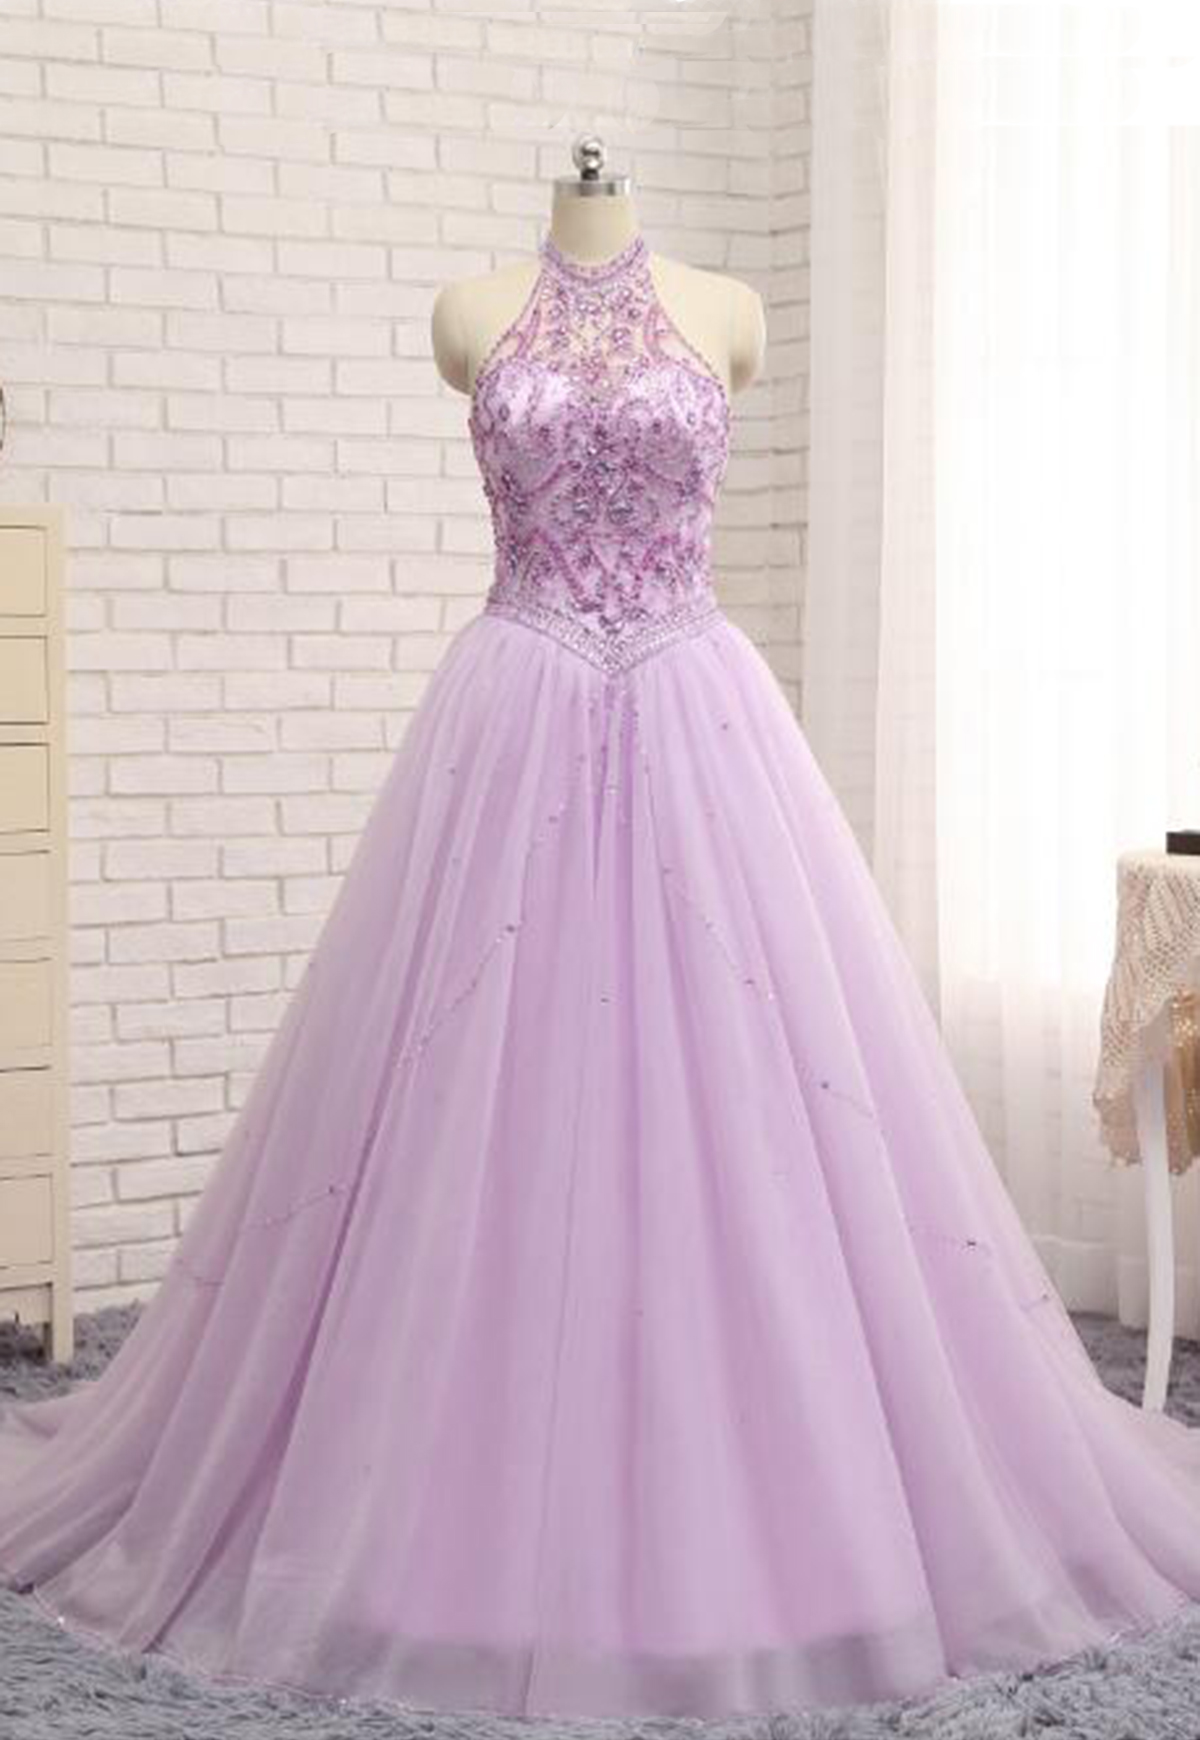 Elegant A Line Beading Tulle Formal Prom Dress, Beautiful Long Prom Dress, Banquet Party Dress